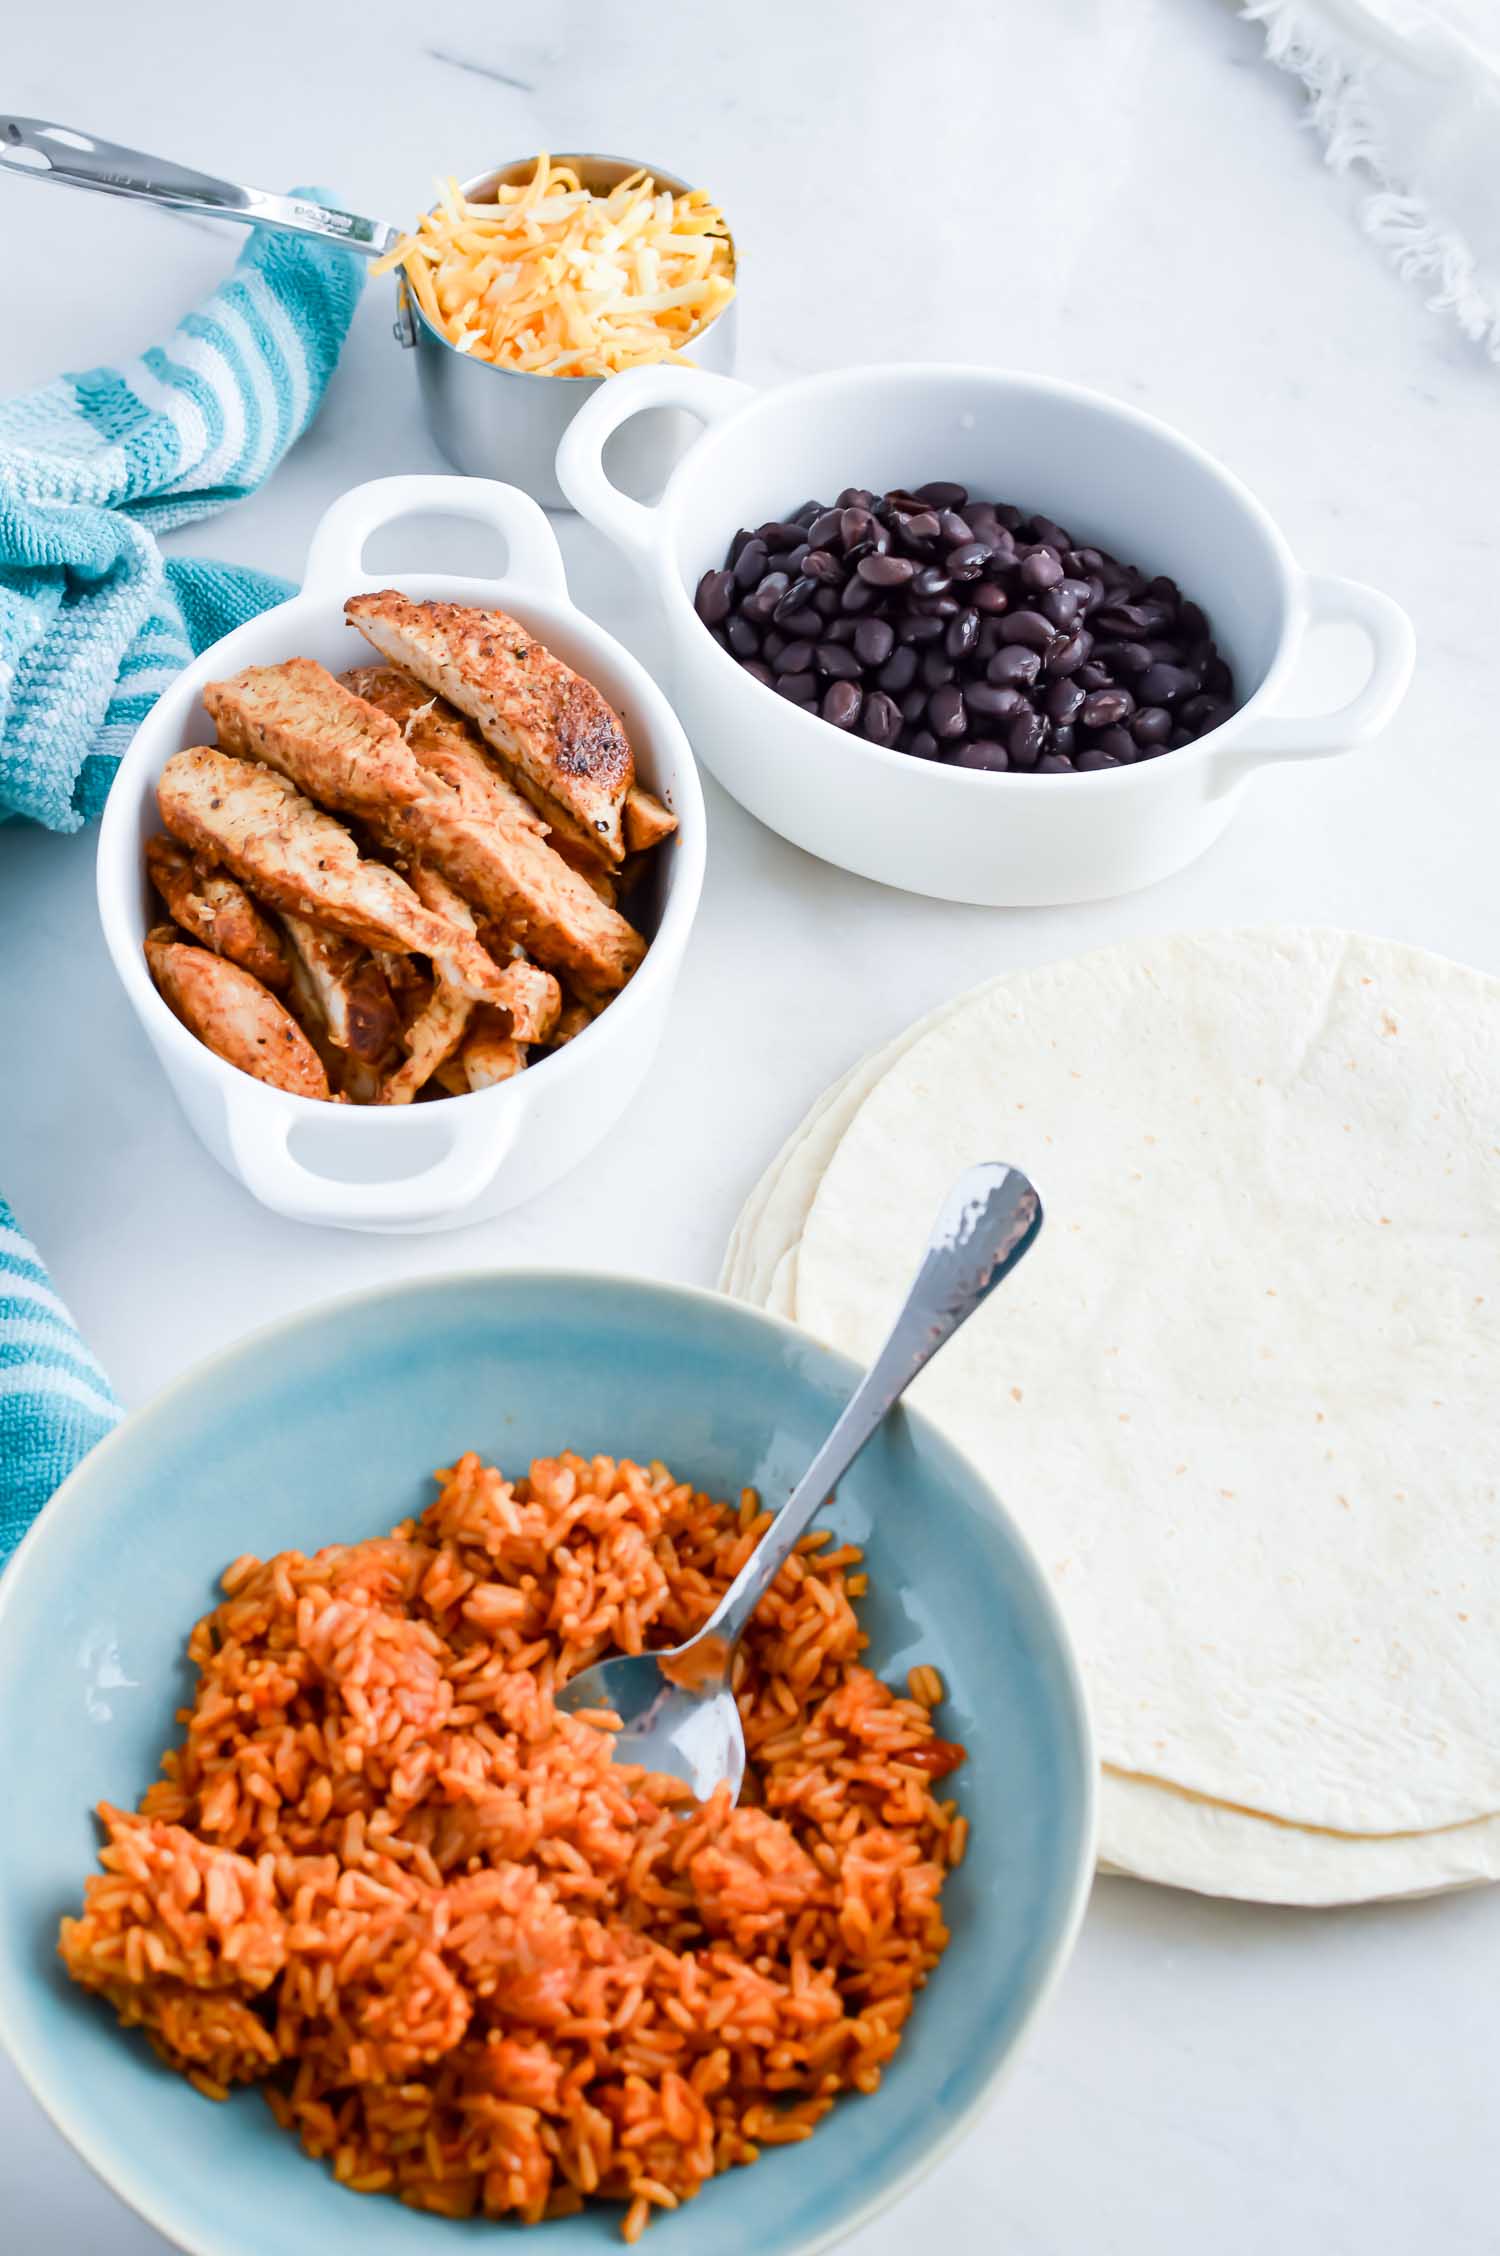 White bowls with cooked, sliced chicken, black beans, Spanish rice and a metal measuring cup with shredded cheese in it for the chicken burrito recipe